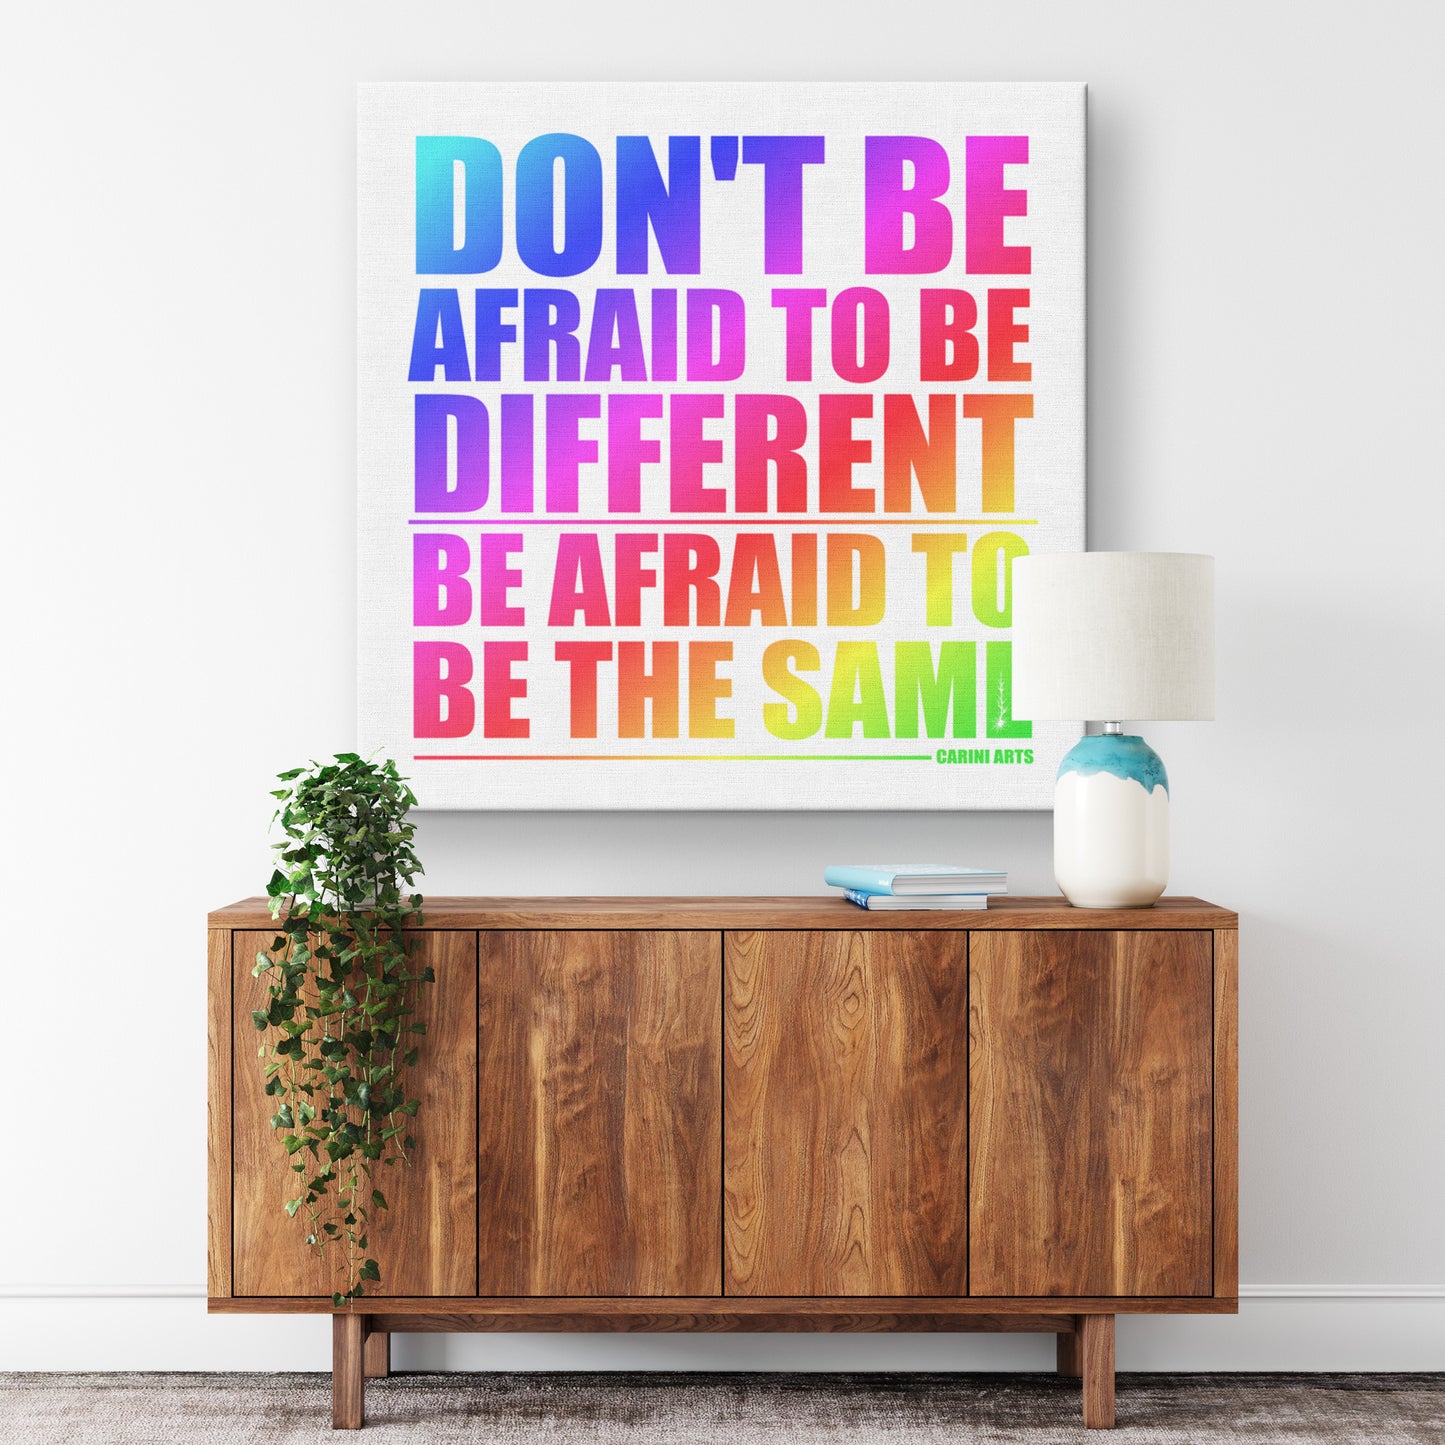 Carini Arts quotes for different people